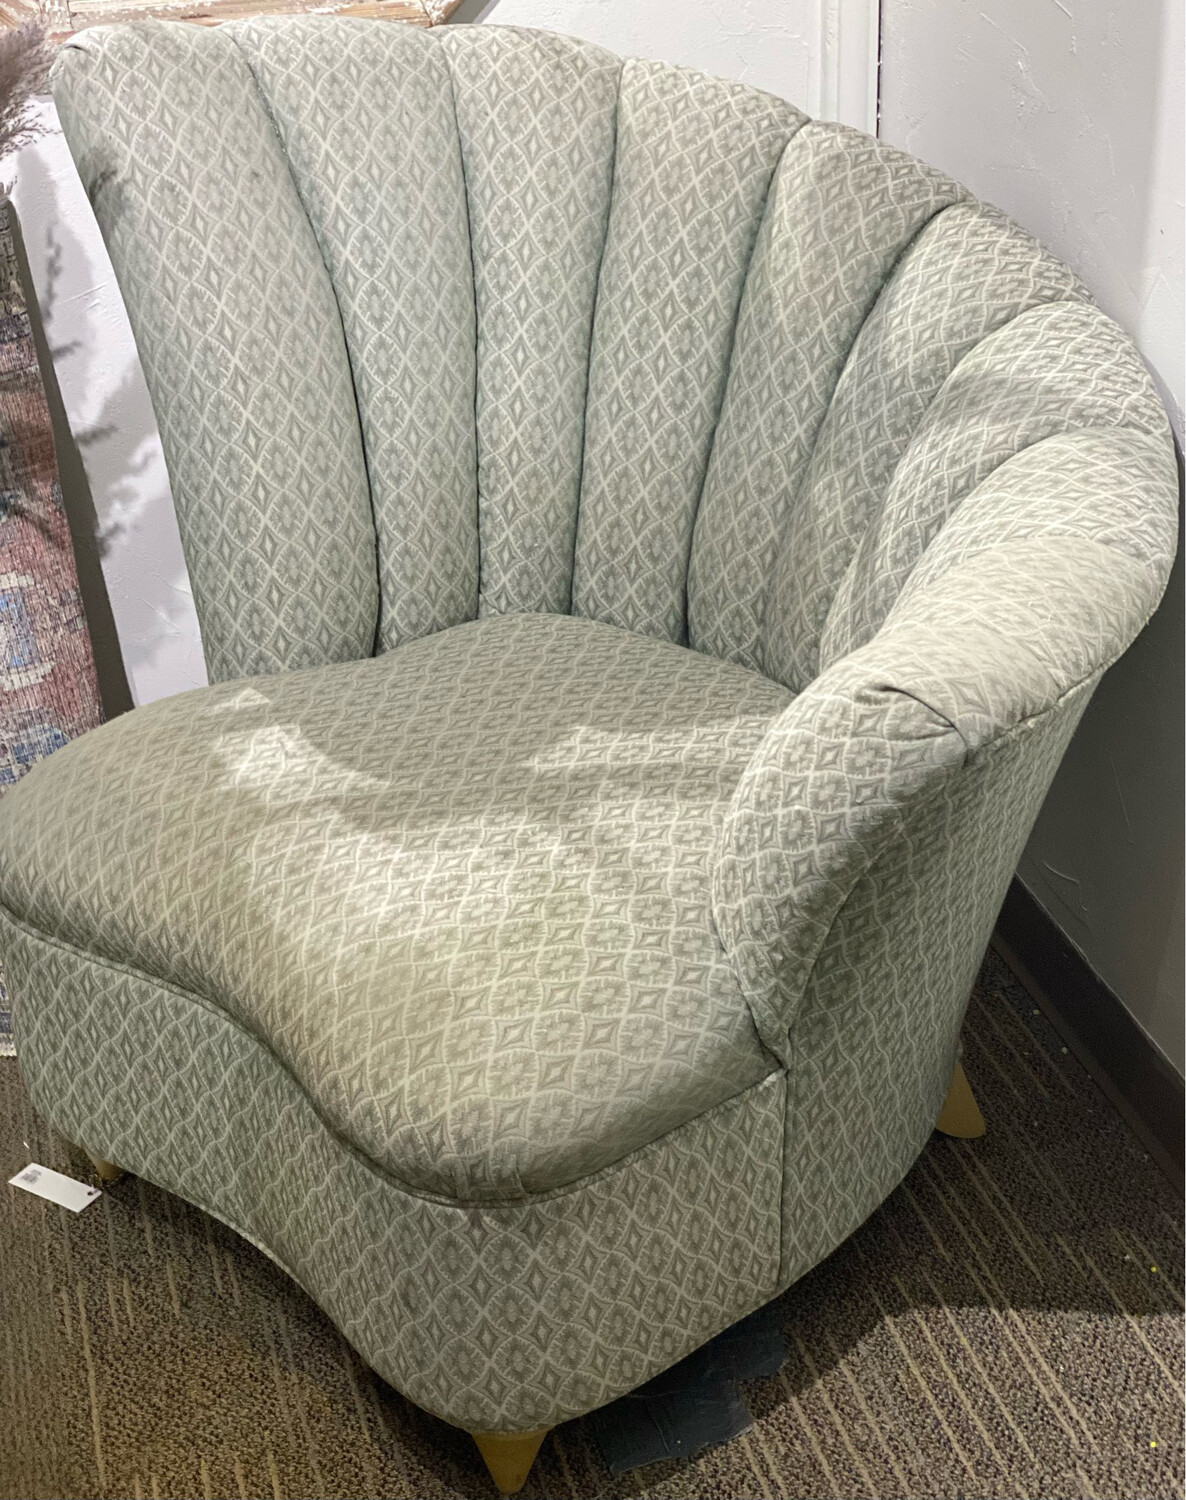 Shell chair - consignment